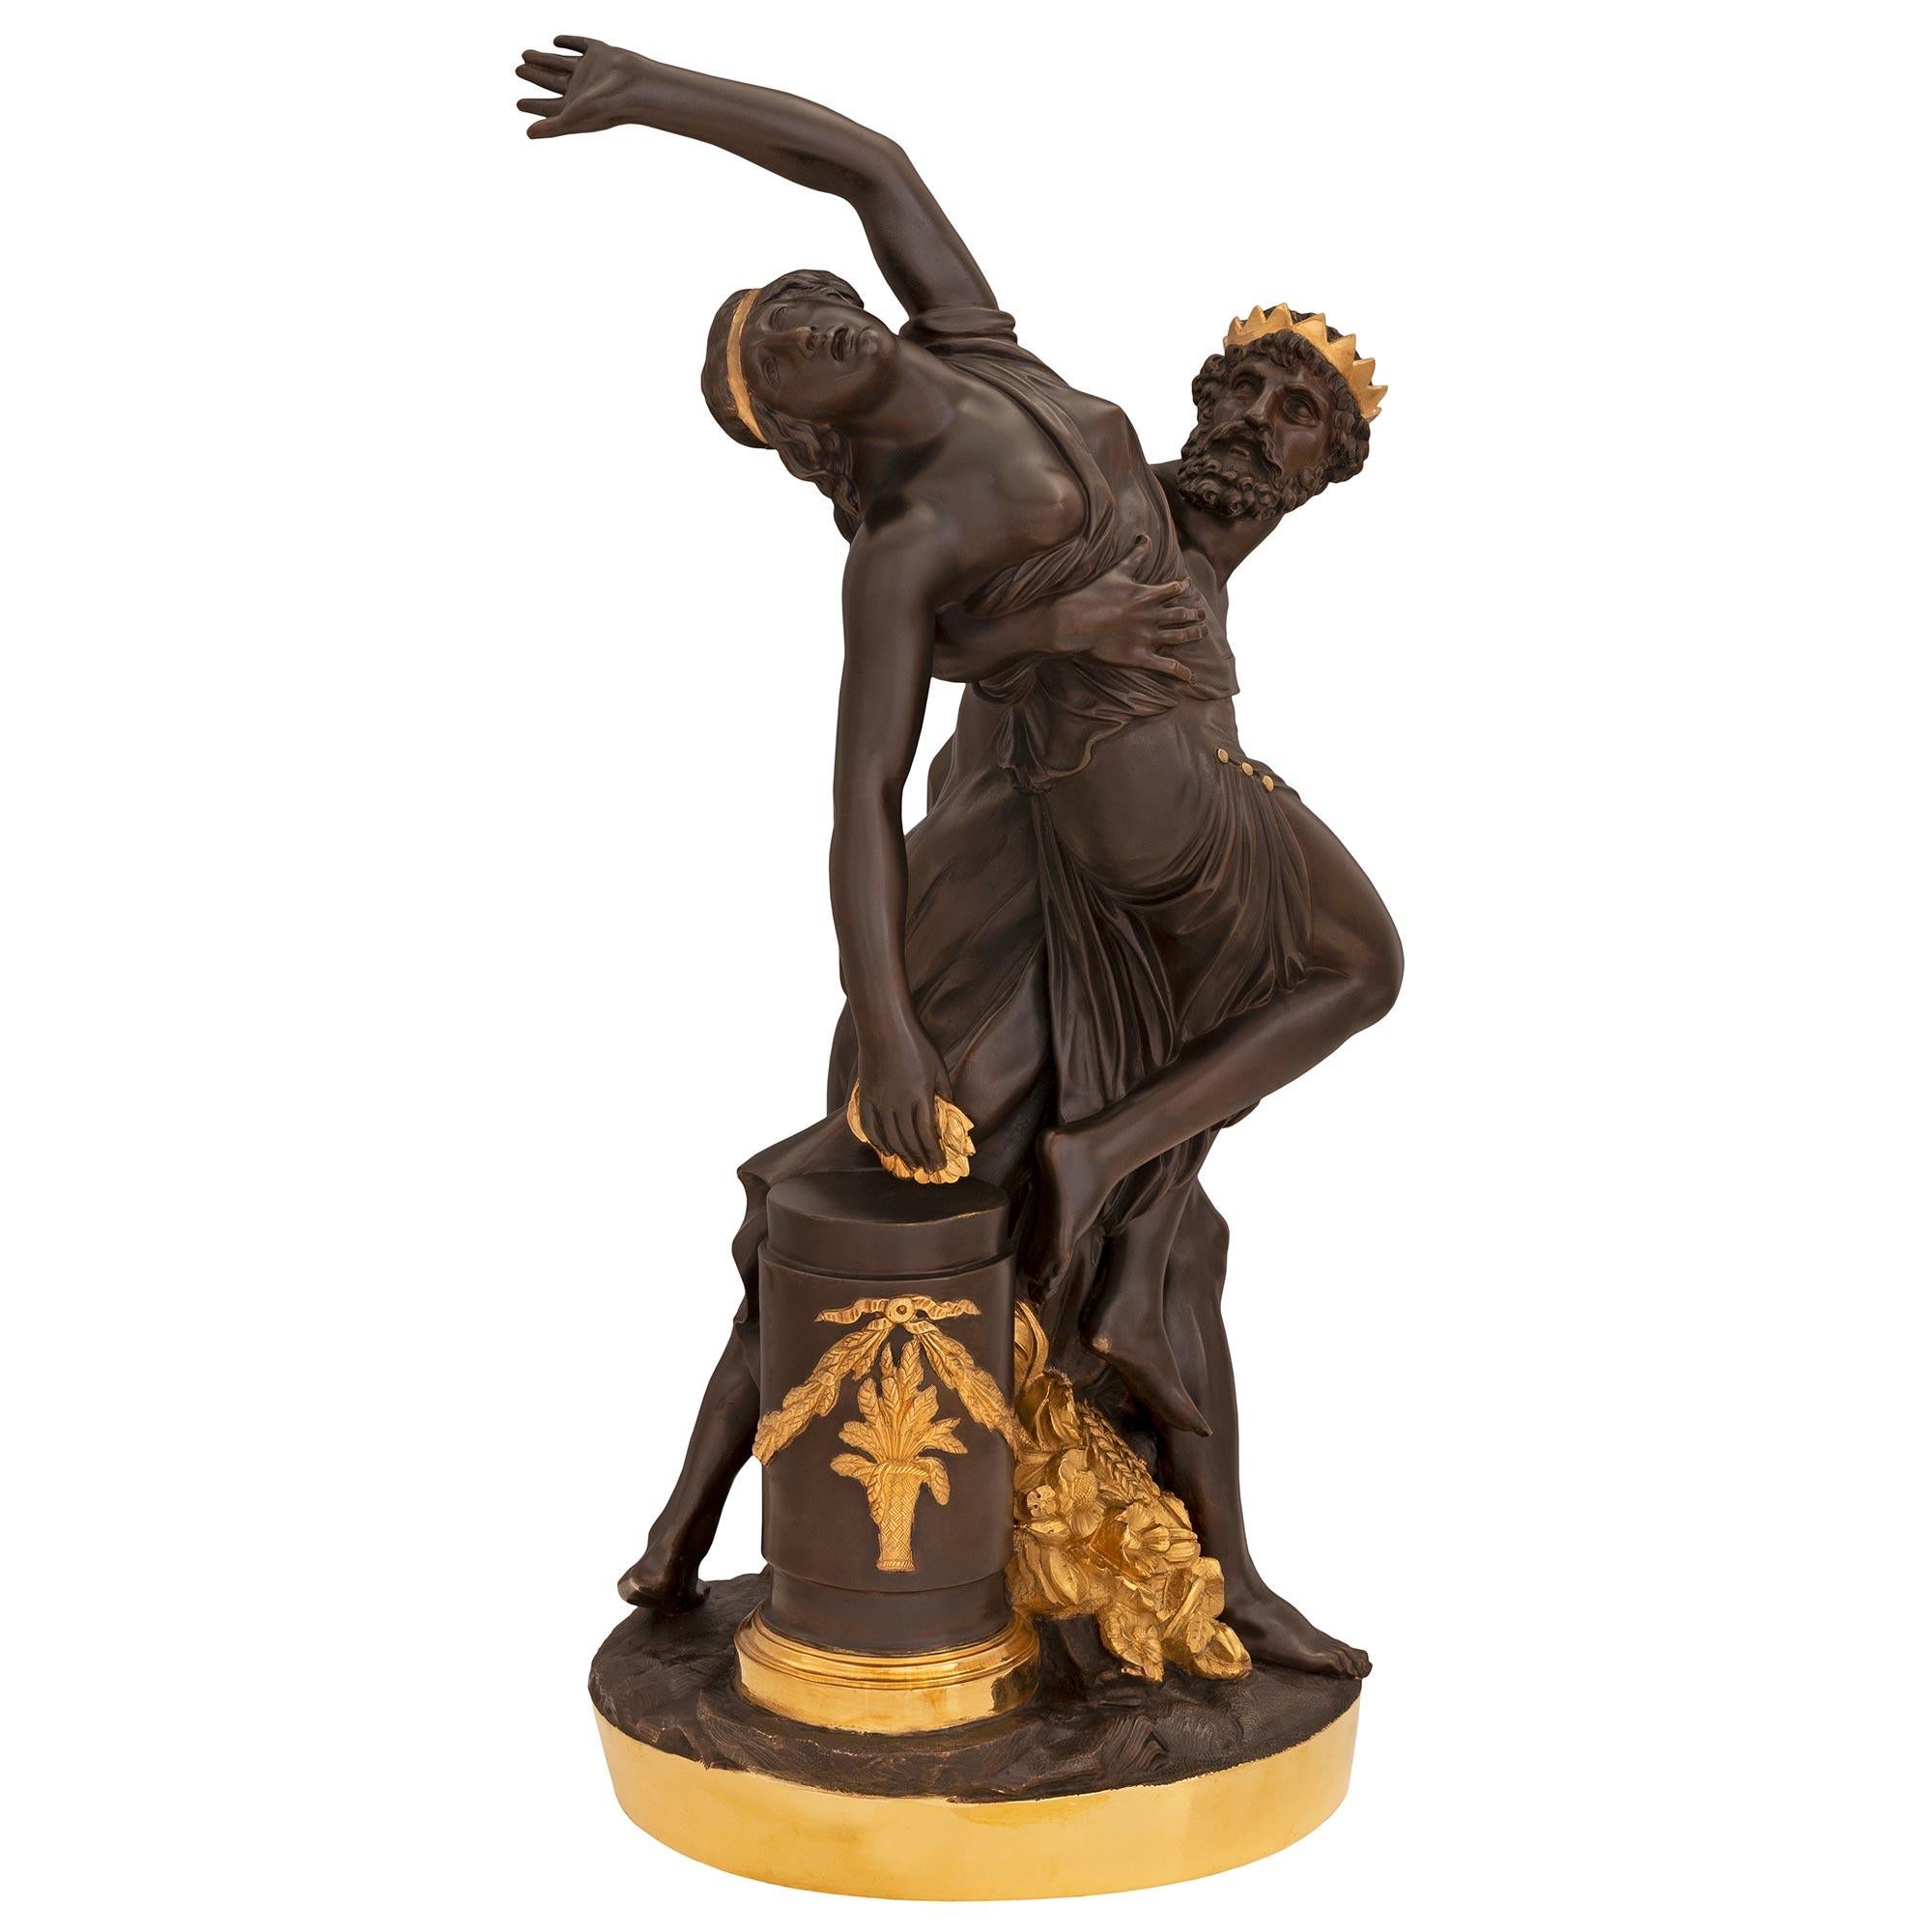 An exceptional and extremely high quality French 19th century Neo-Classical st. Belle Époque period patinated bronze and ormolu statue of Demeter and Poseidon. The impressive statue is raised by a circular ormolu base with a wonderfully executed